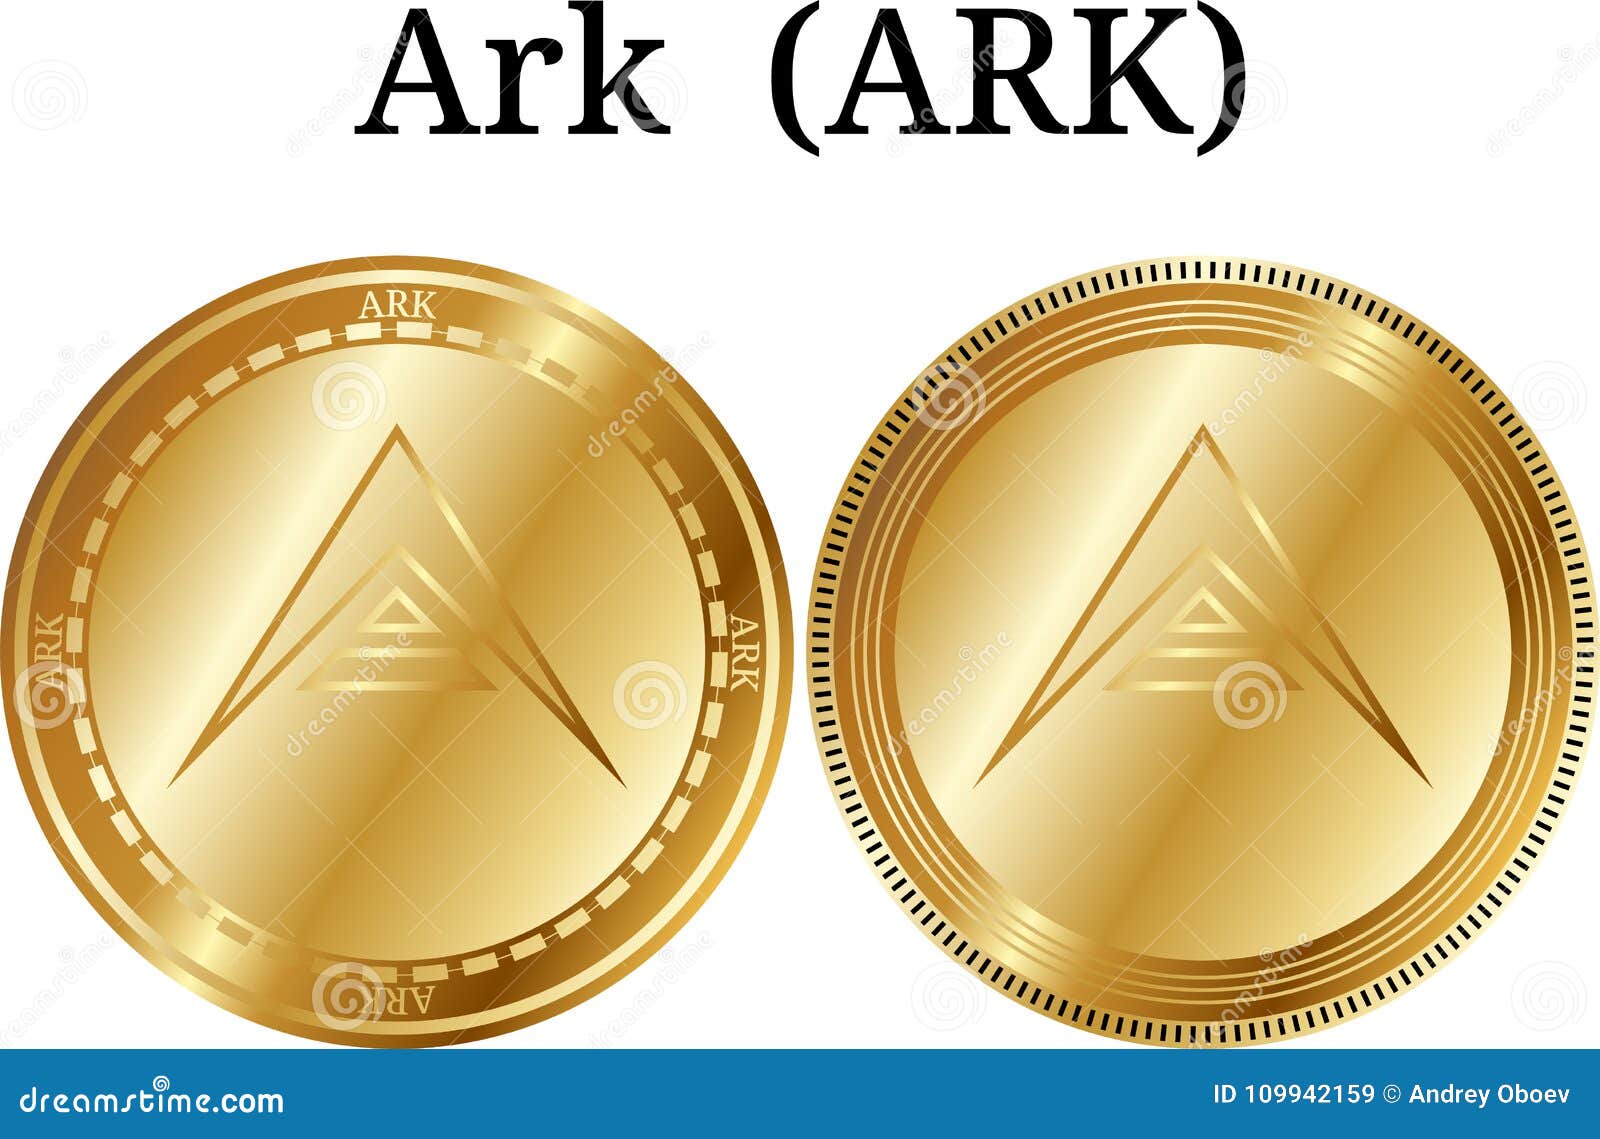 Ark Investment - CoinDesk